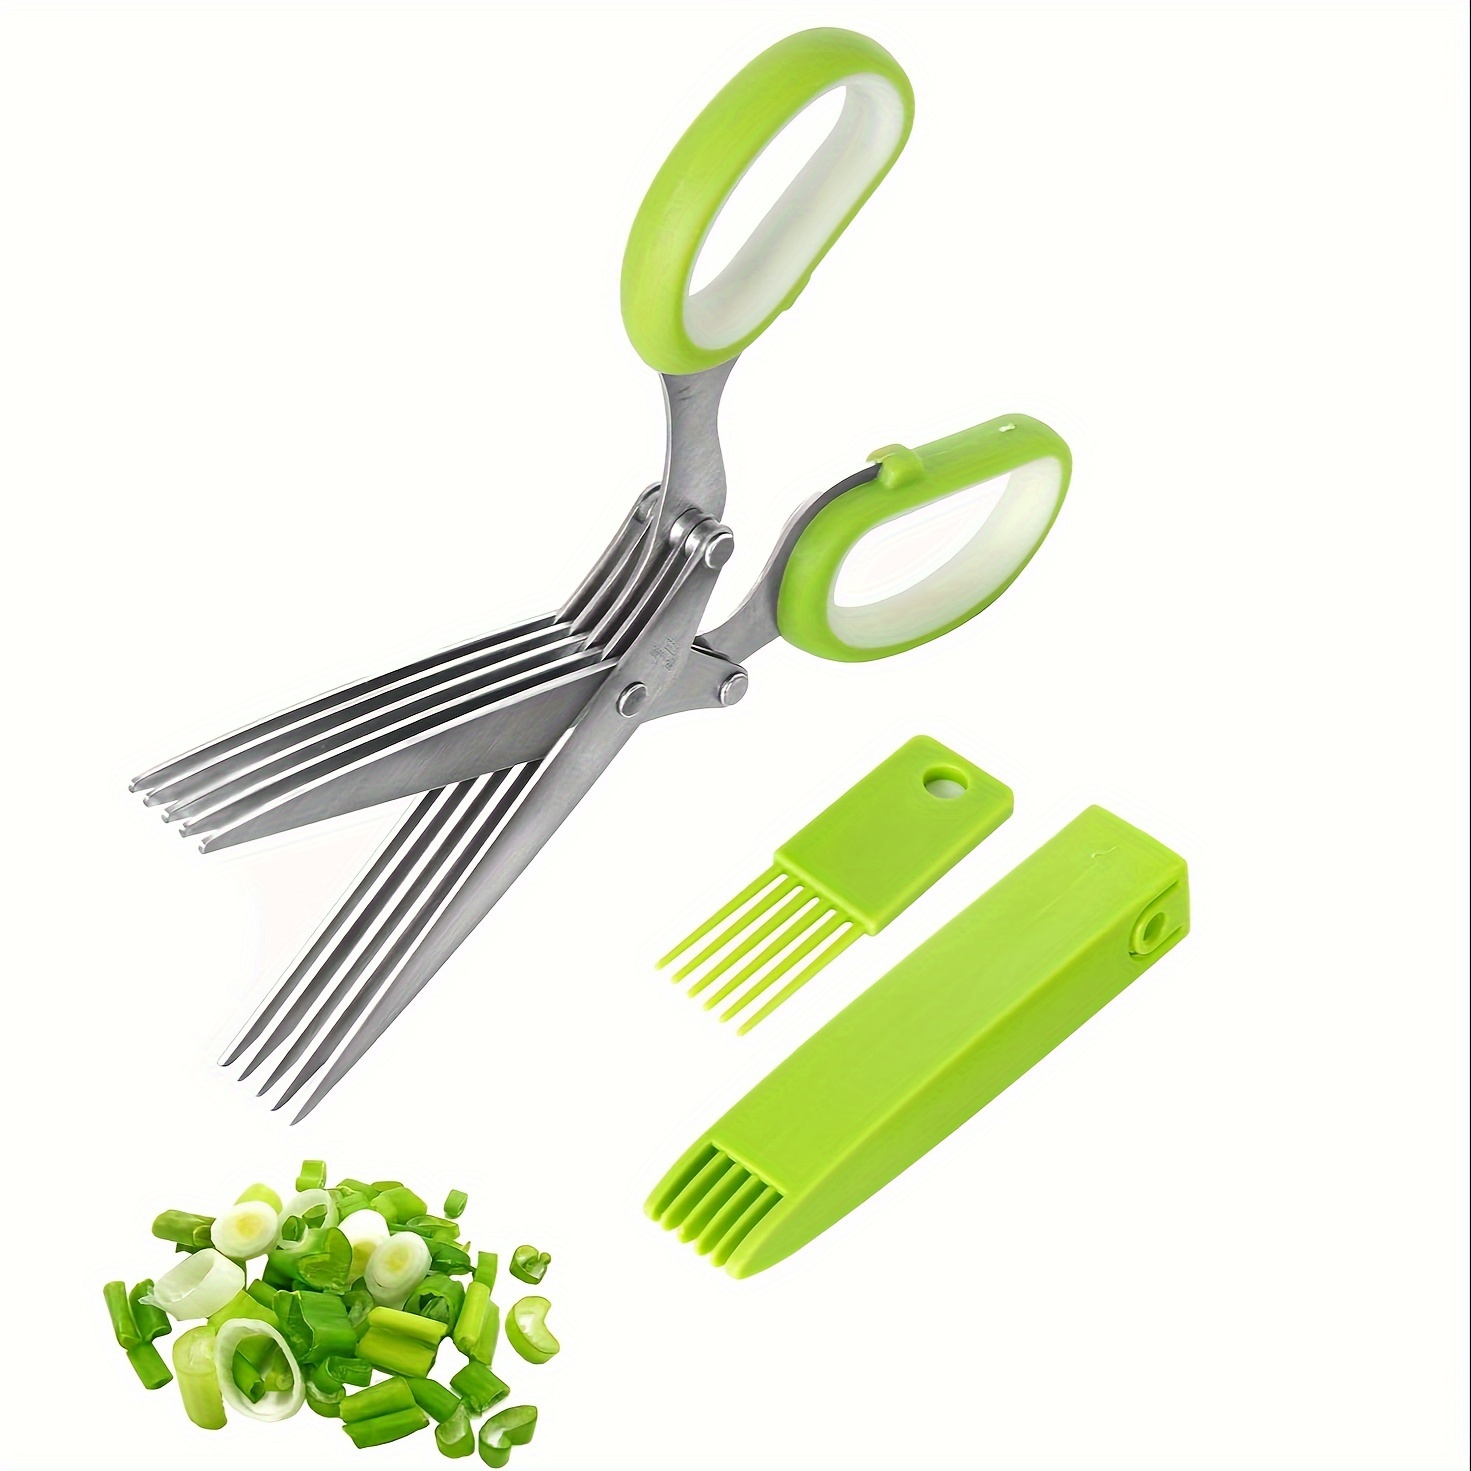 Herb Scissors by JYTUUL - Stainless Steel 5 Blades Multipurpose Kitchen Shears with Safety Cover and Cleaning Comb - Cutter/Chopper / Mincer for Herbs